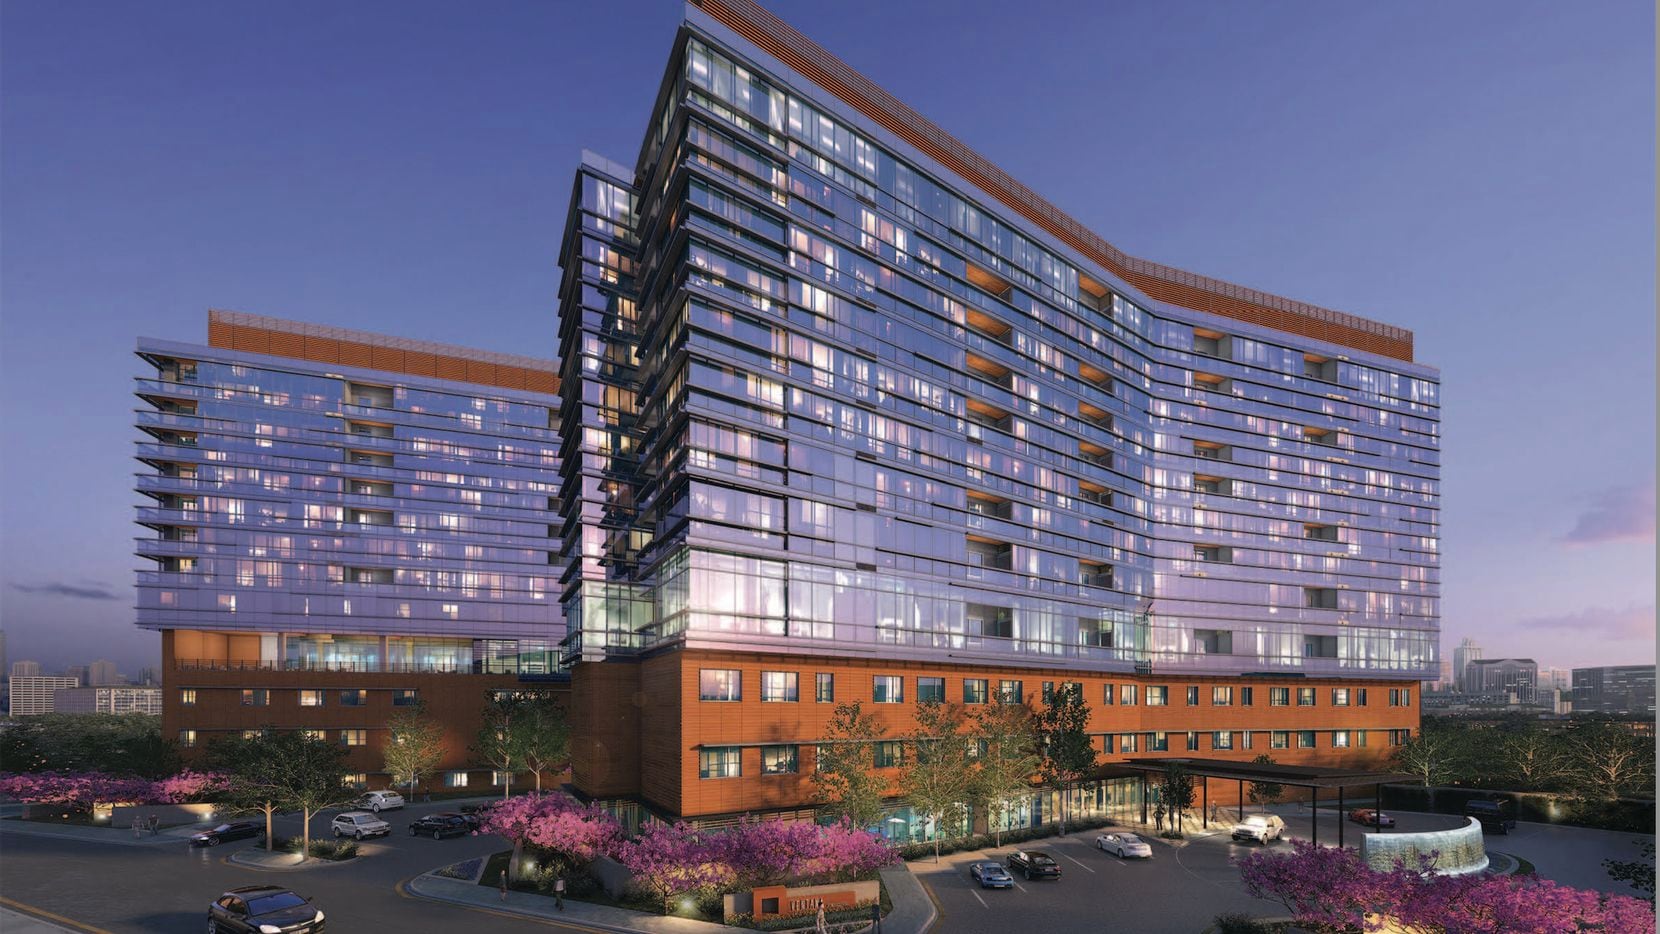 The two Ventana towers are planned at the southwest corner of U.S. 75 and Northwest Highway.